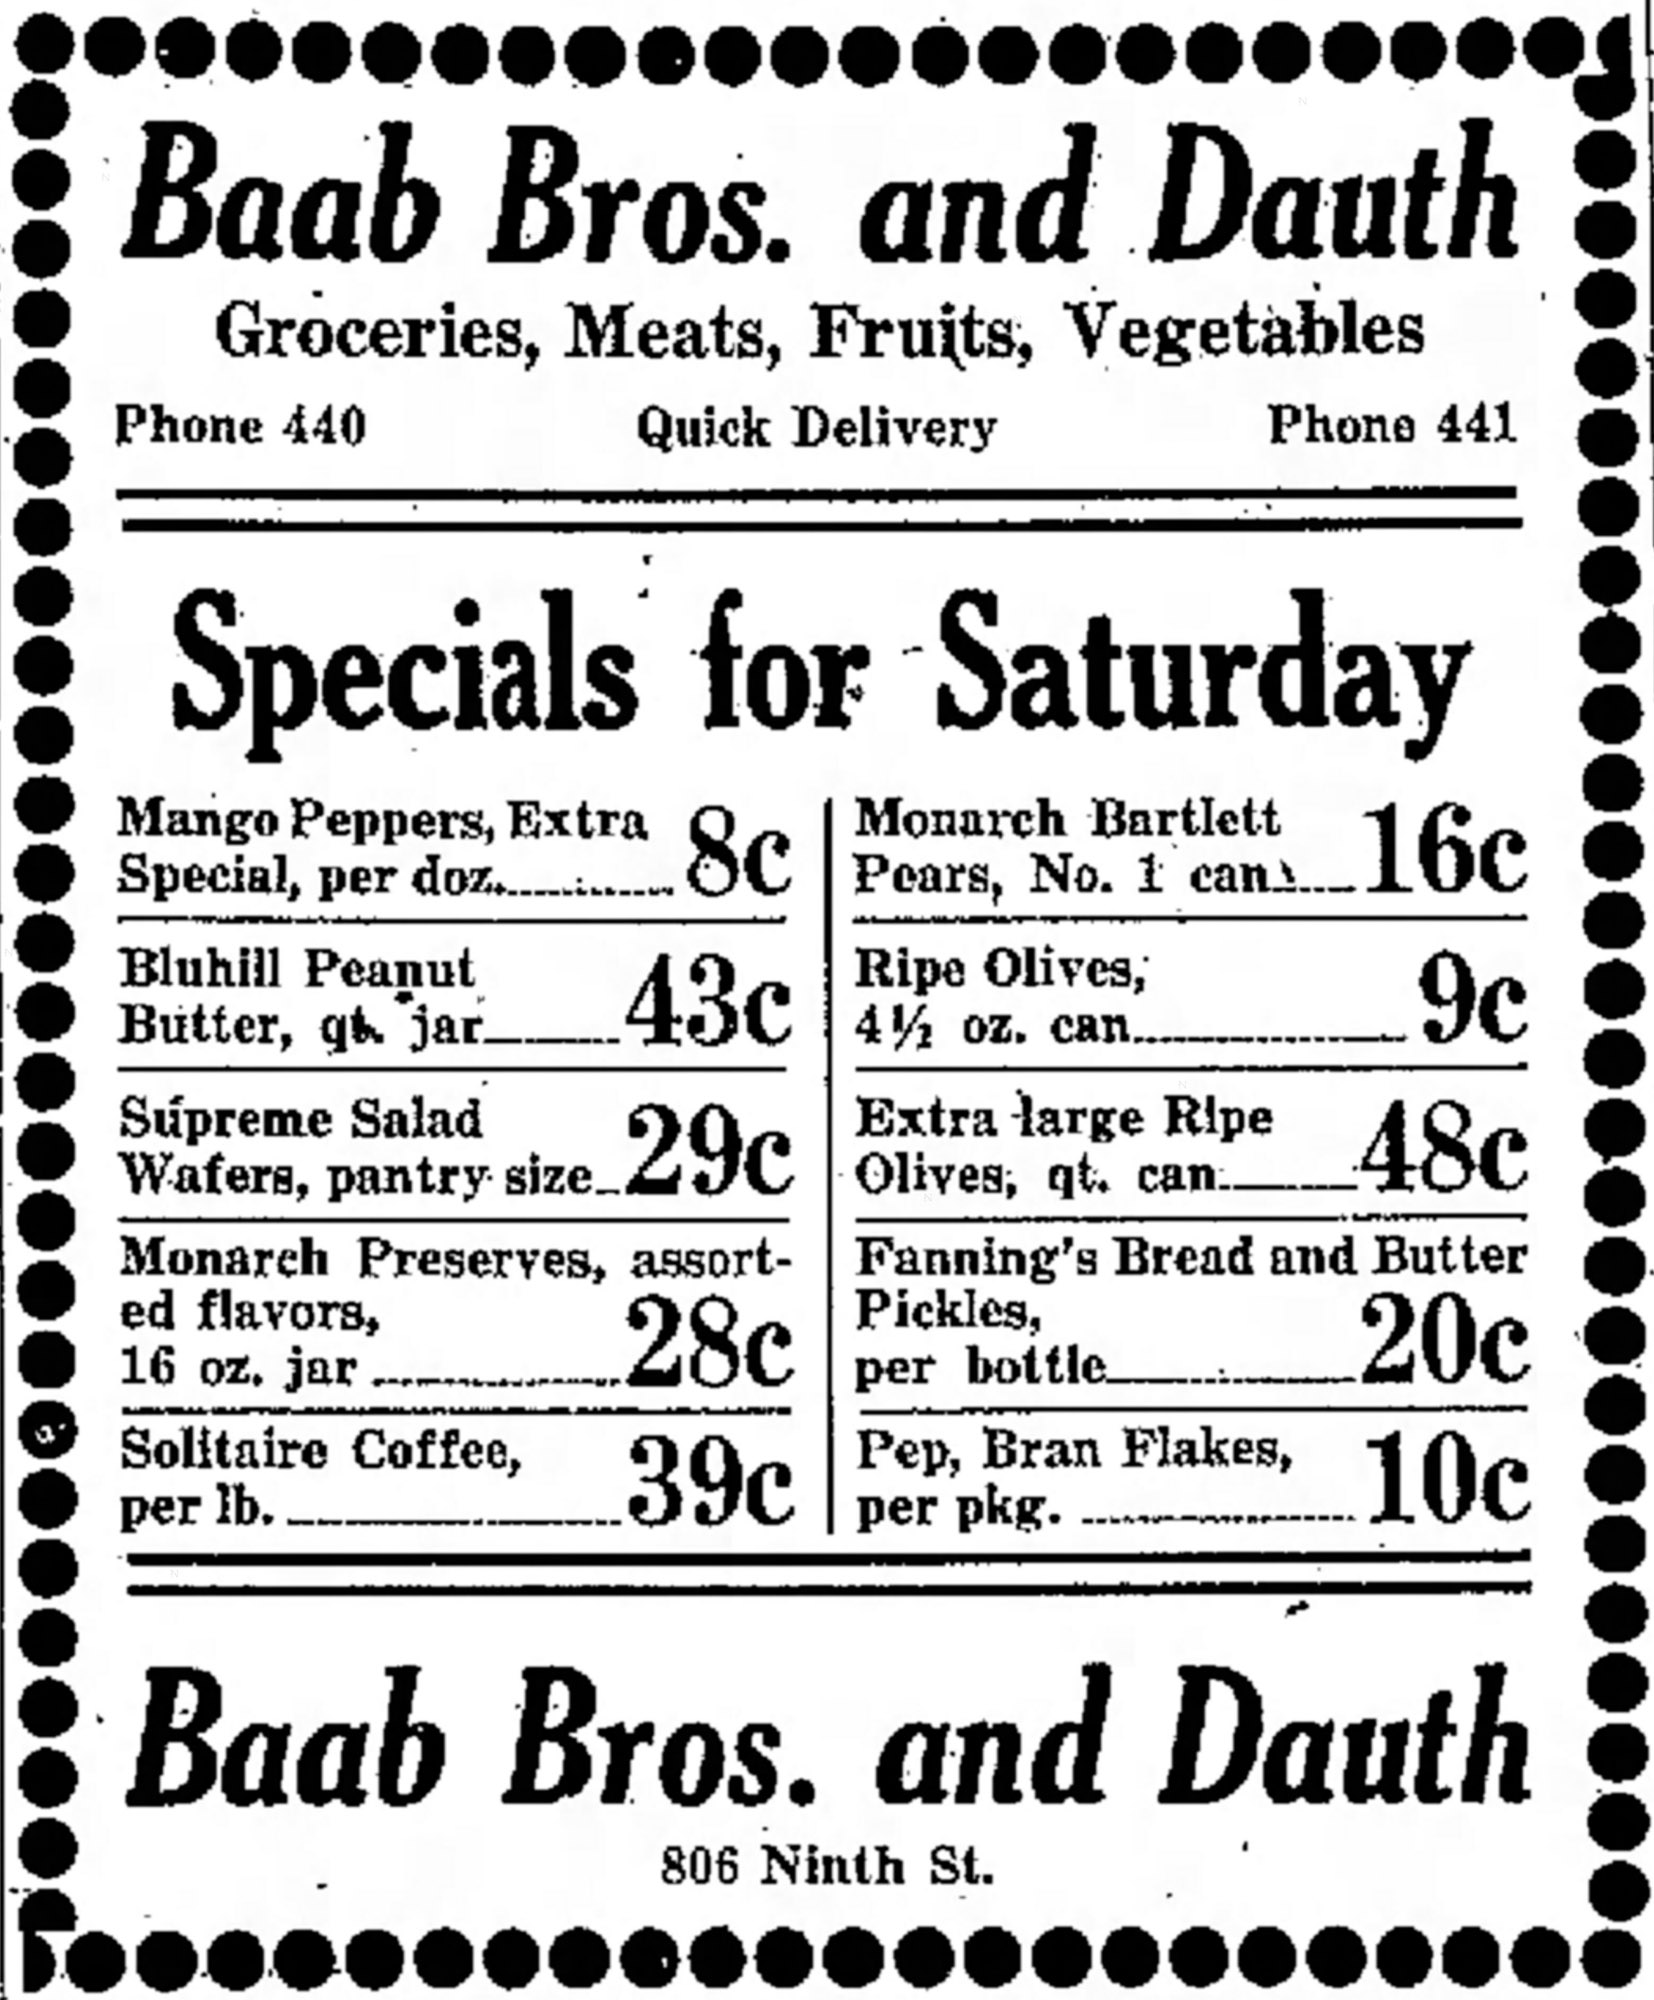 Dauth Family Archive - 1931-08-14 - Greeley Daily Tribune - Baab Bros and Dauth Advertisement